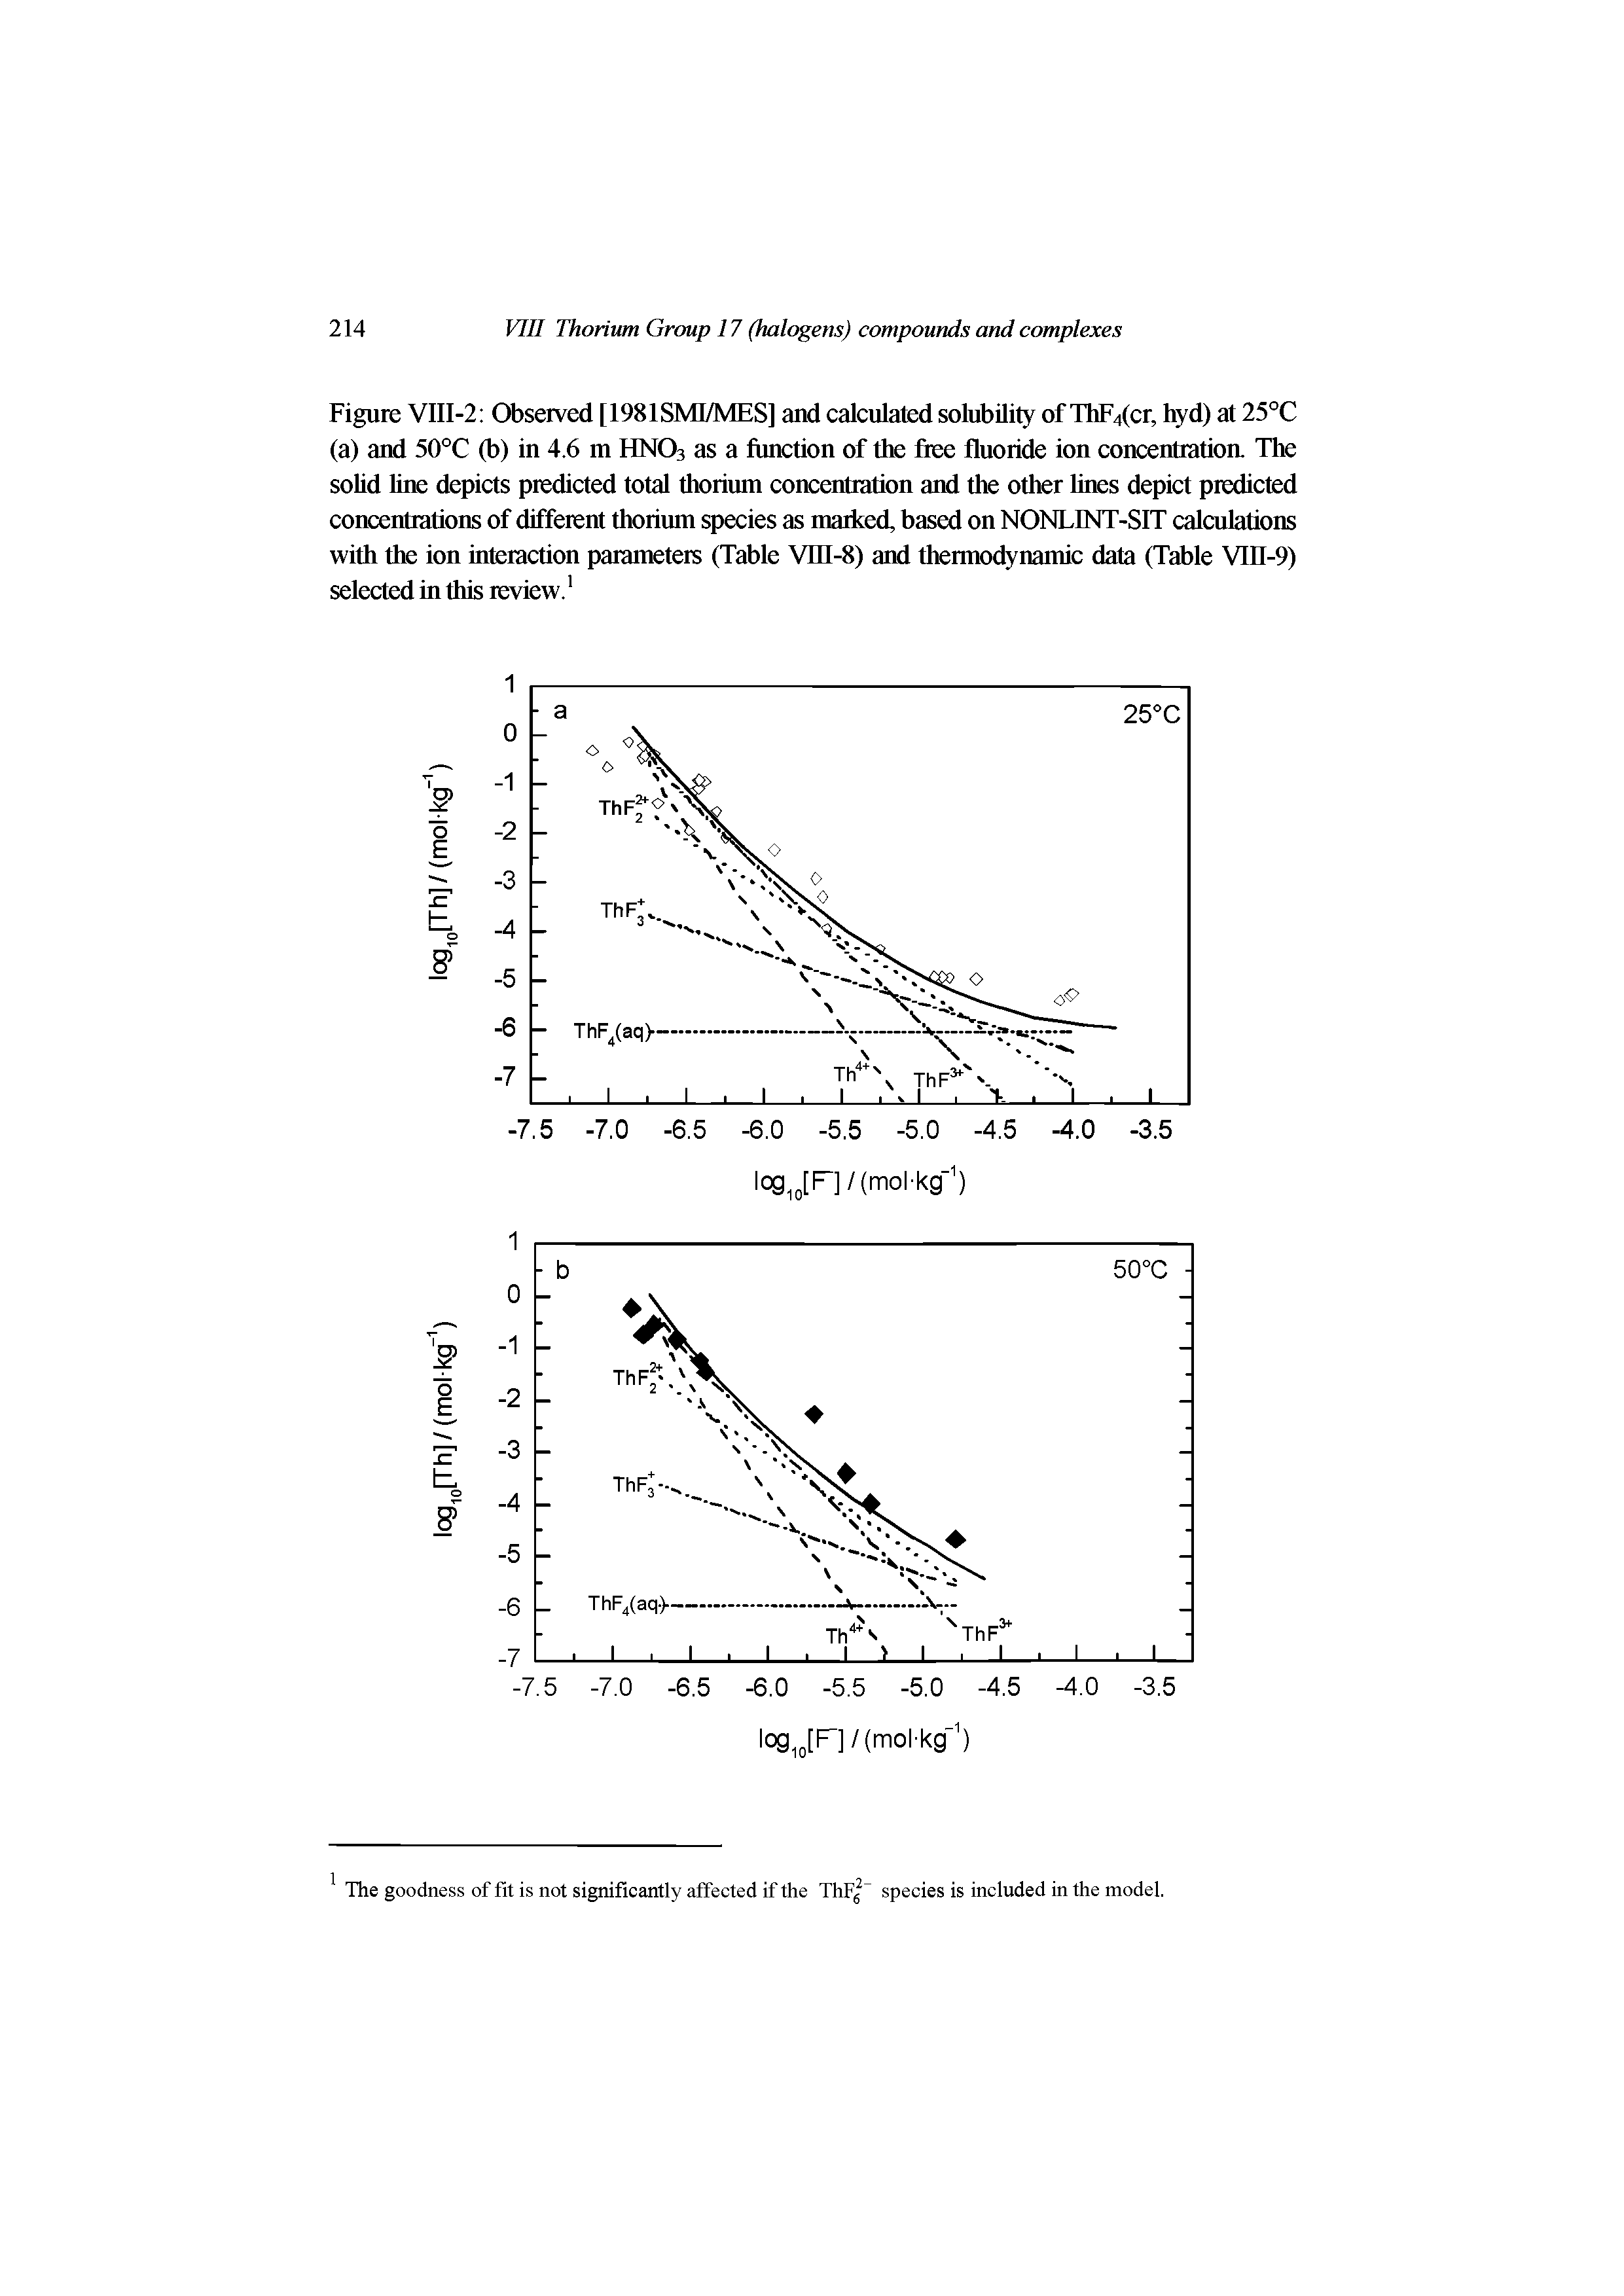 Figure VIII-2 Observed [1981SMI/MES] and calculated solubility of ThF4(cr, hyd) at 25°C (a) and 50°C (b) in 4.6 m HNO3 as a function of the free fluoride ion concentration. The soUd line depiets predieted total thorium eoneentration and the other lines depict predicted eoncentrations of different thorium speeies as marked, based on NONLtNT-SlT ealcnlations with the ion interaetion parameters (Table Vm-8) and thermodynamic data (Table VIII-9) selected in this review. ...